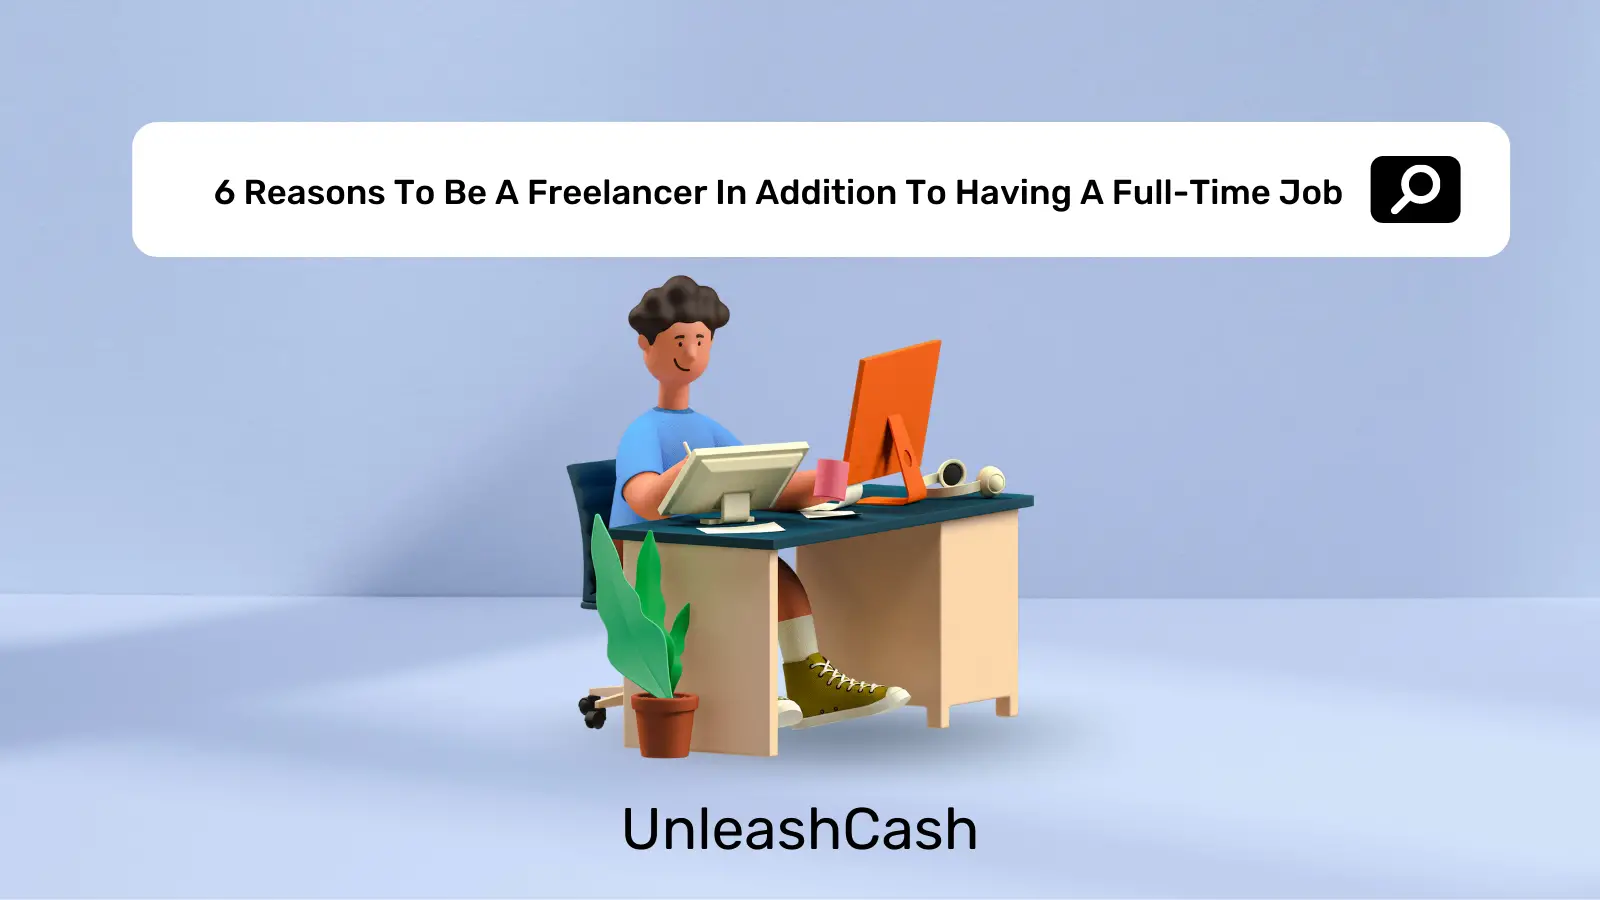 6 Reasons To Be A Freelancer In Addition To Having A Full-Time Job